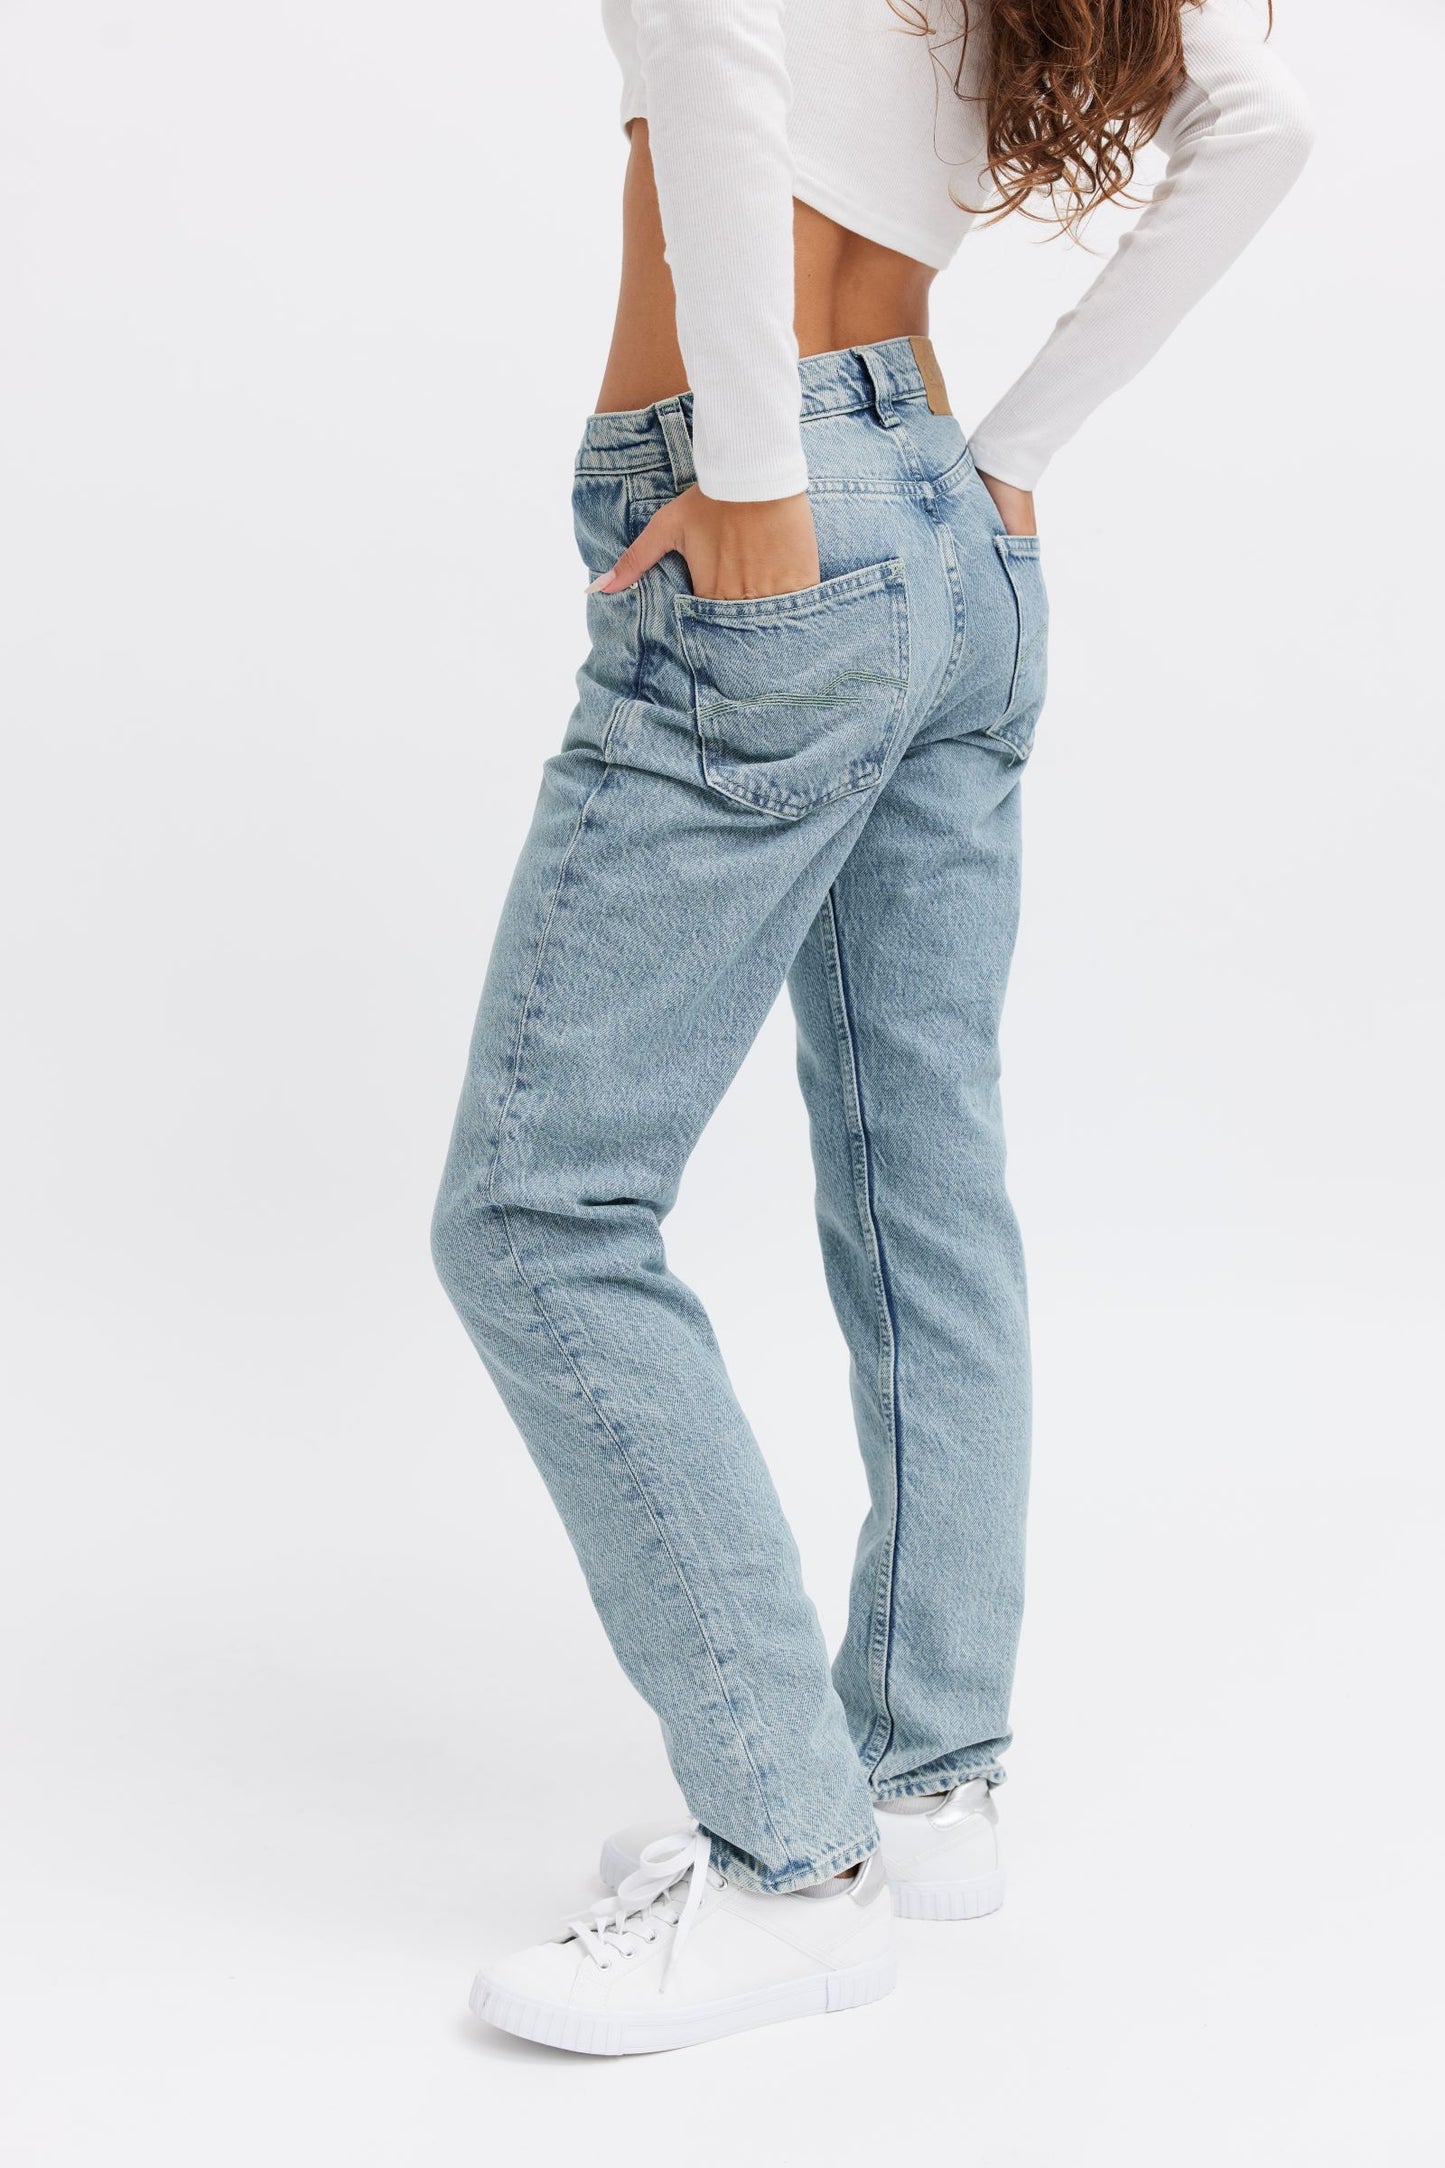 Women's Best Jeans for Everyday use - Stylish, 100% Organic & GOTS Certified